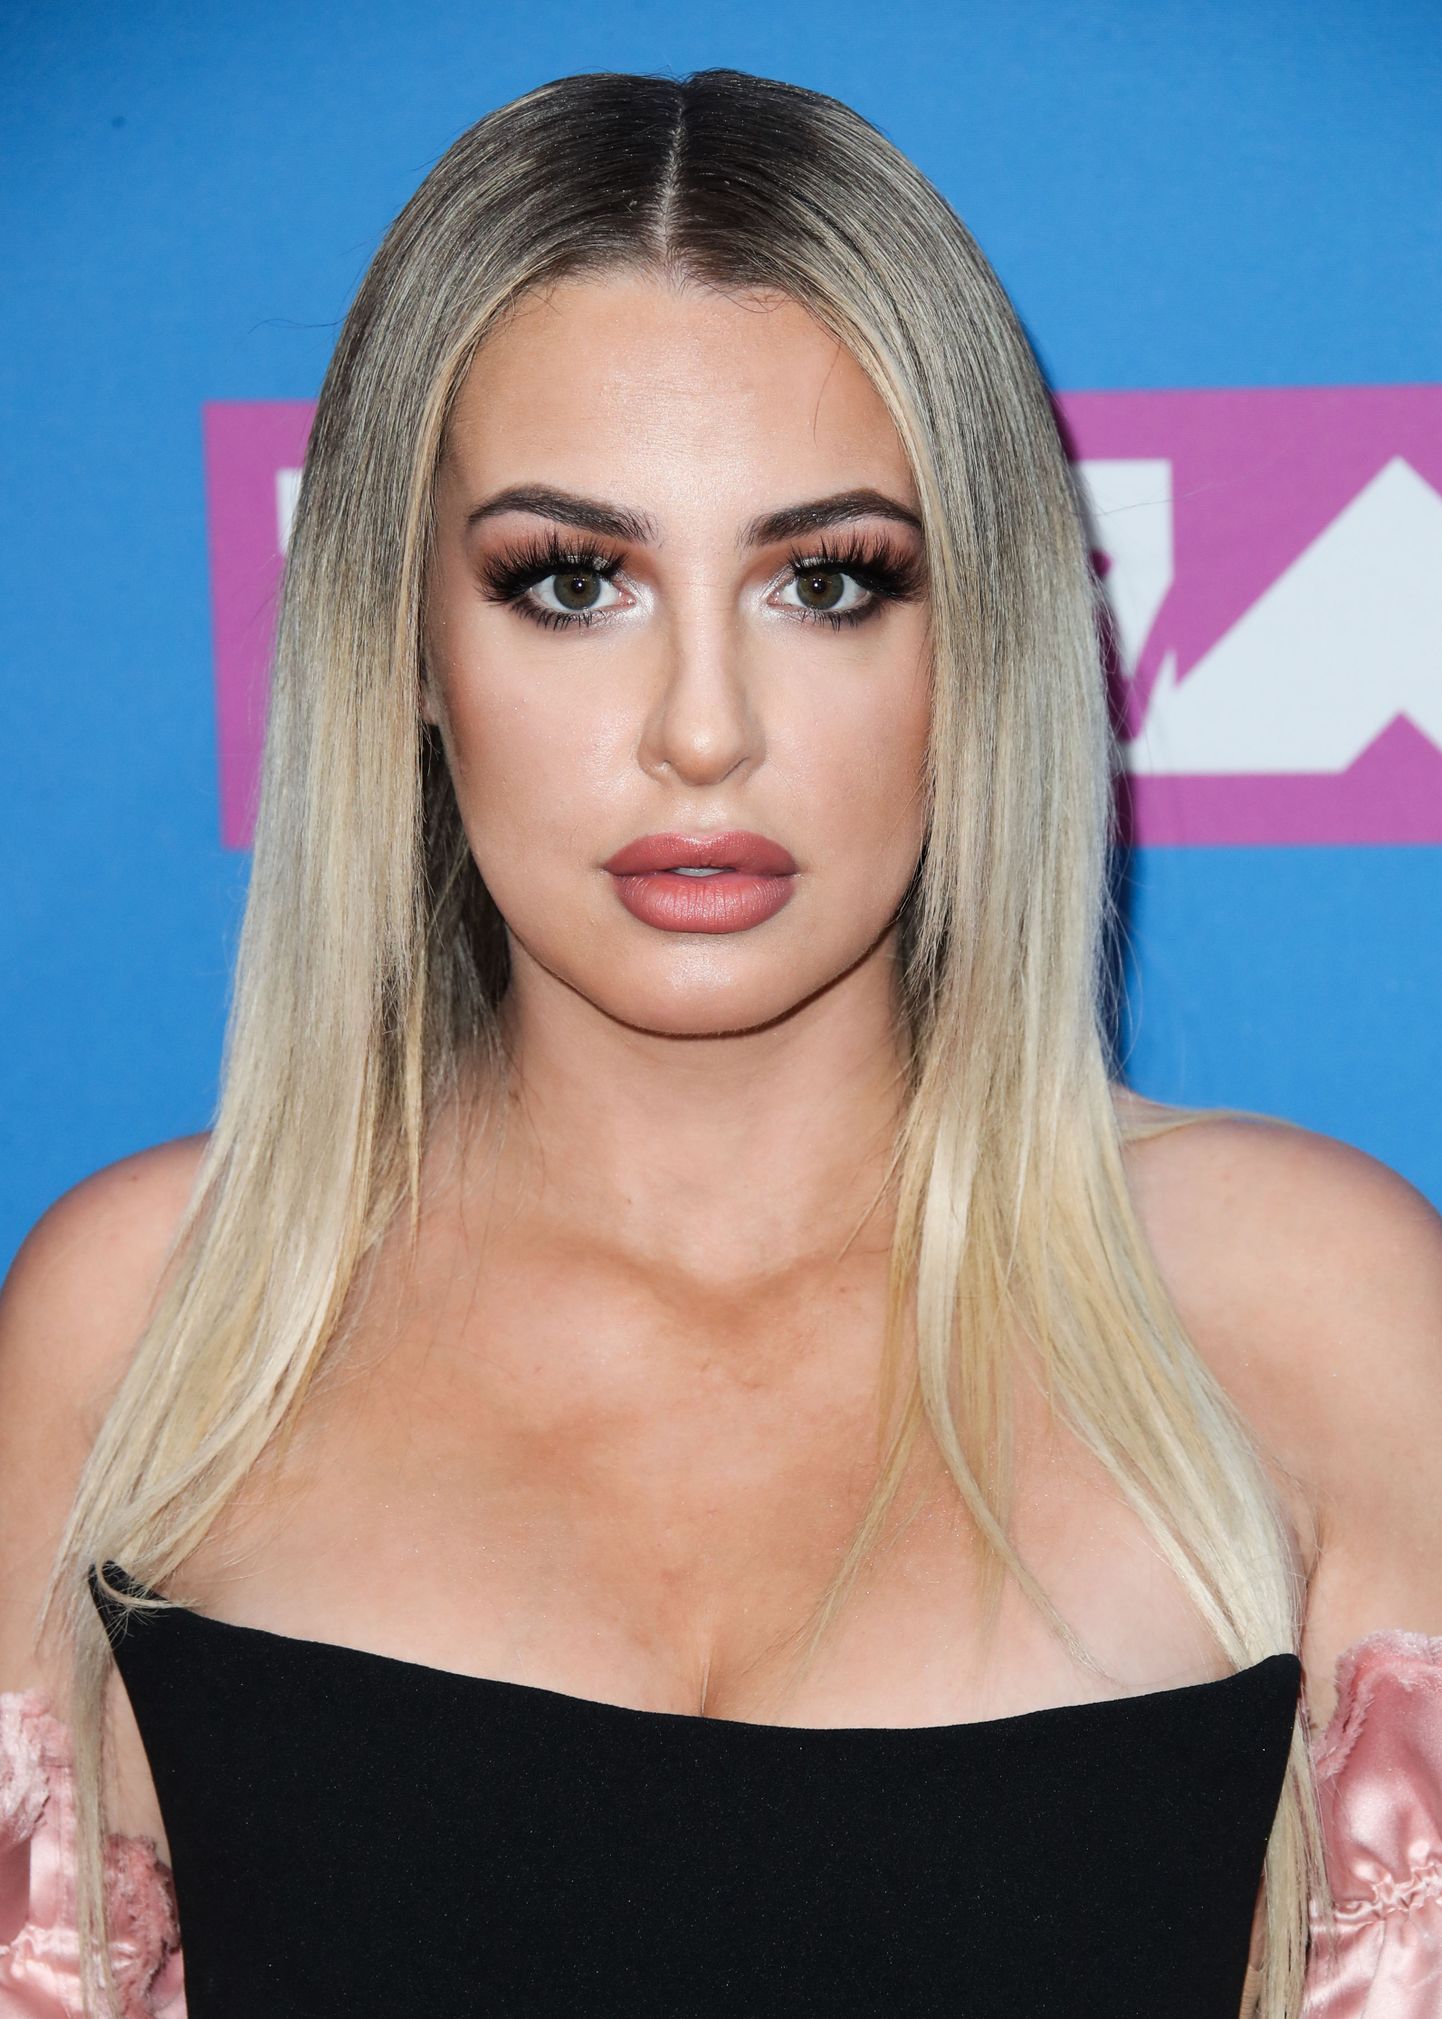 MANHATTAN, NEW YORK CITY, NY, USA - AUGUST 20: Tana Mongeau at the 2018 MTV Video Music Awards held at the Radio City Music Hall on August 20, 2018 in Manhattan, New York City, New York, United States. (Photo by Xavier Collin/Image Press Agency)